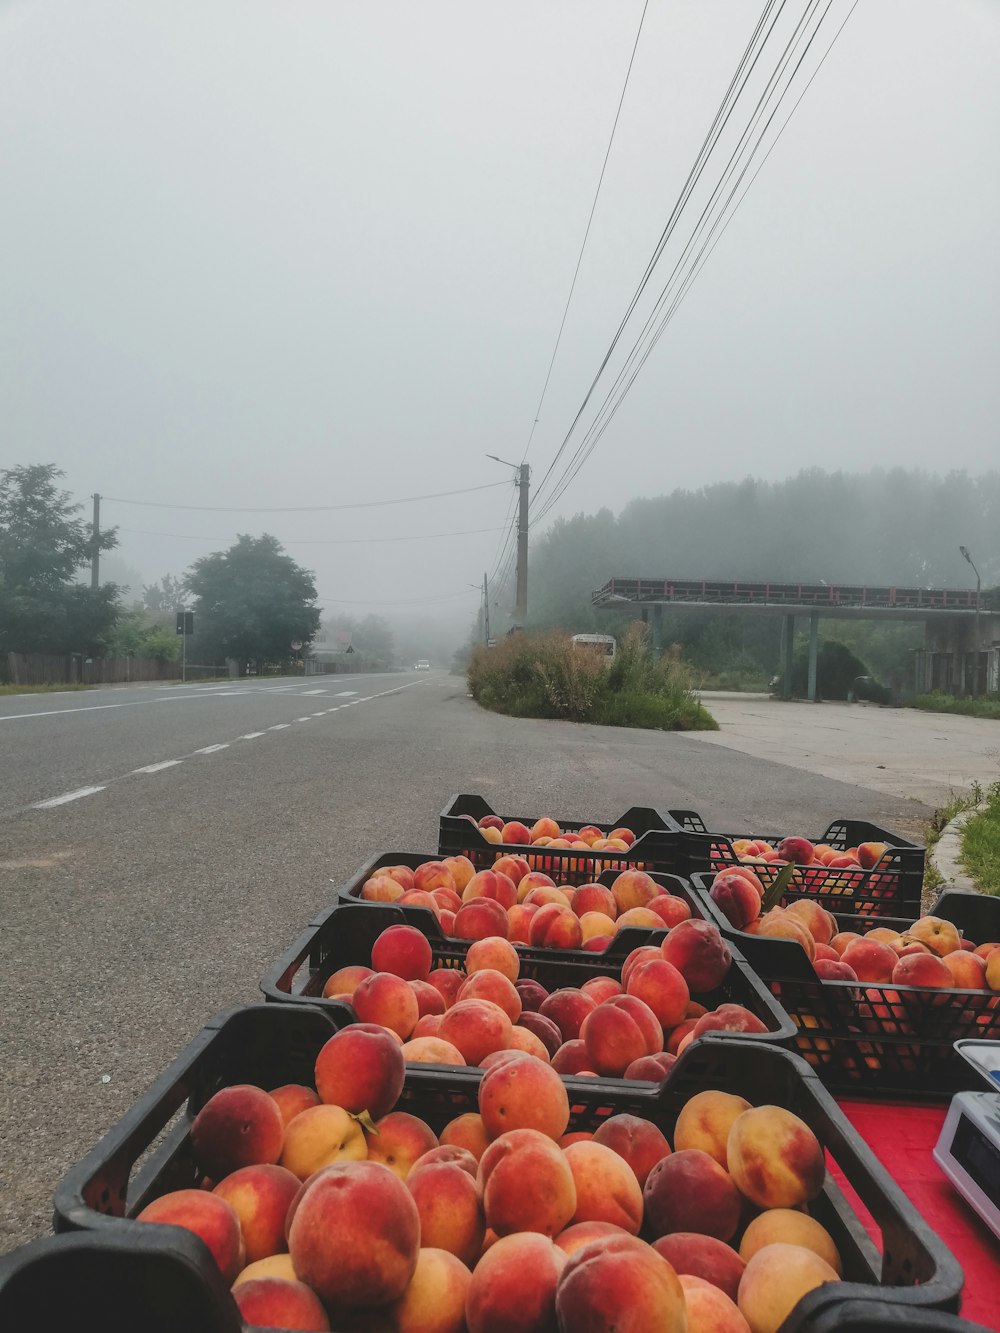 crates of peaches on the side of the road on a foggy day